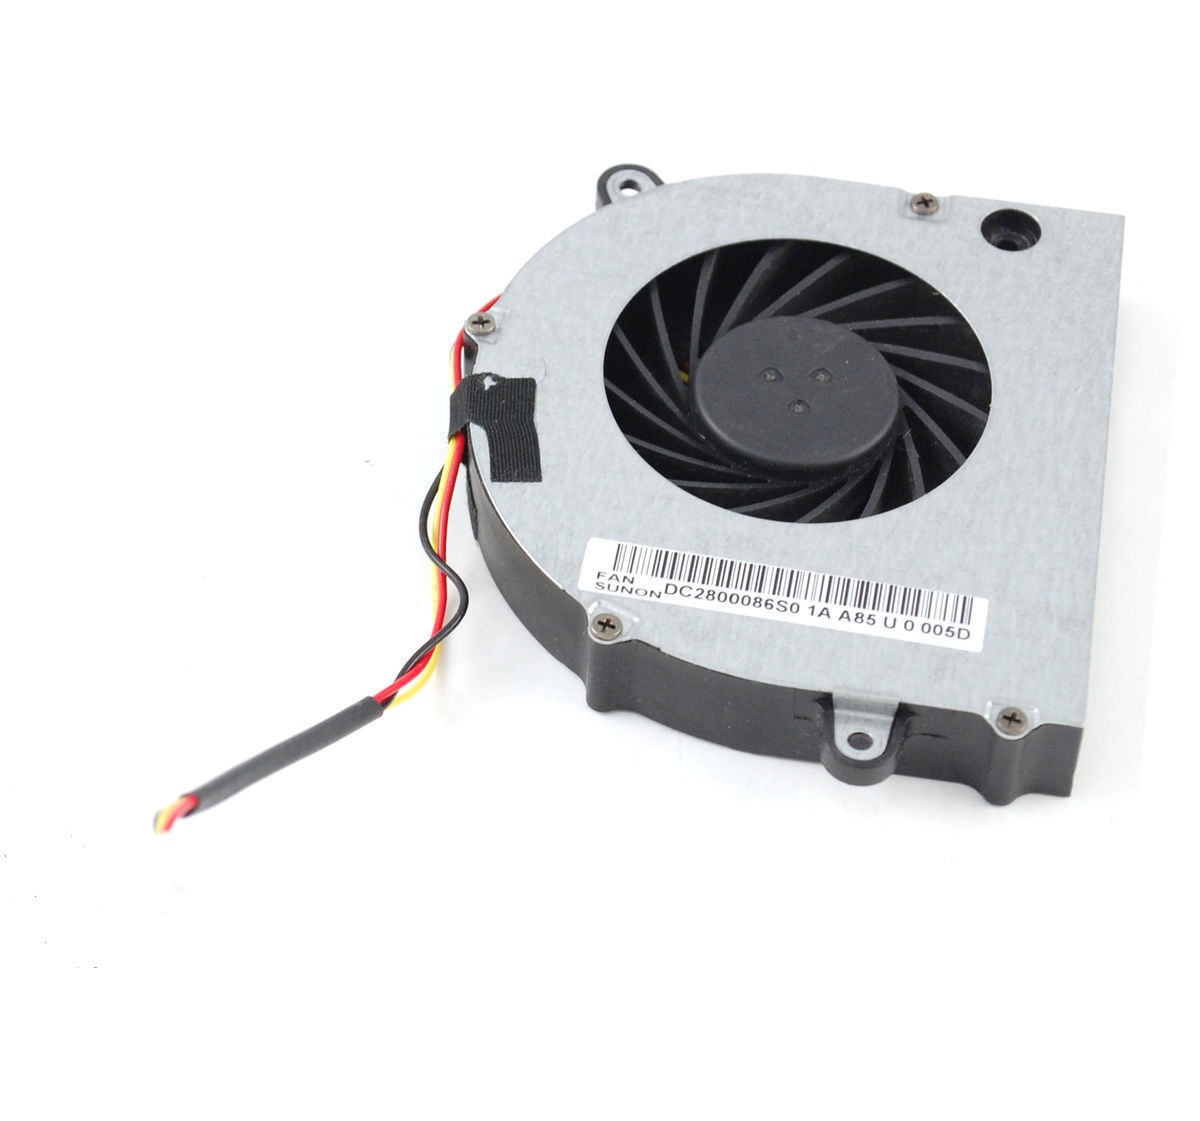 Lenovo Essential G780 Cooling Fan DC28000AIA0 - Click Image to Close